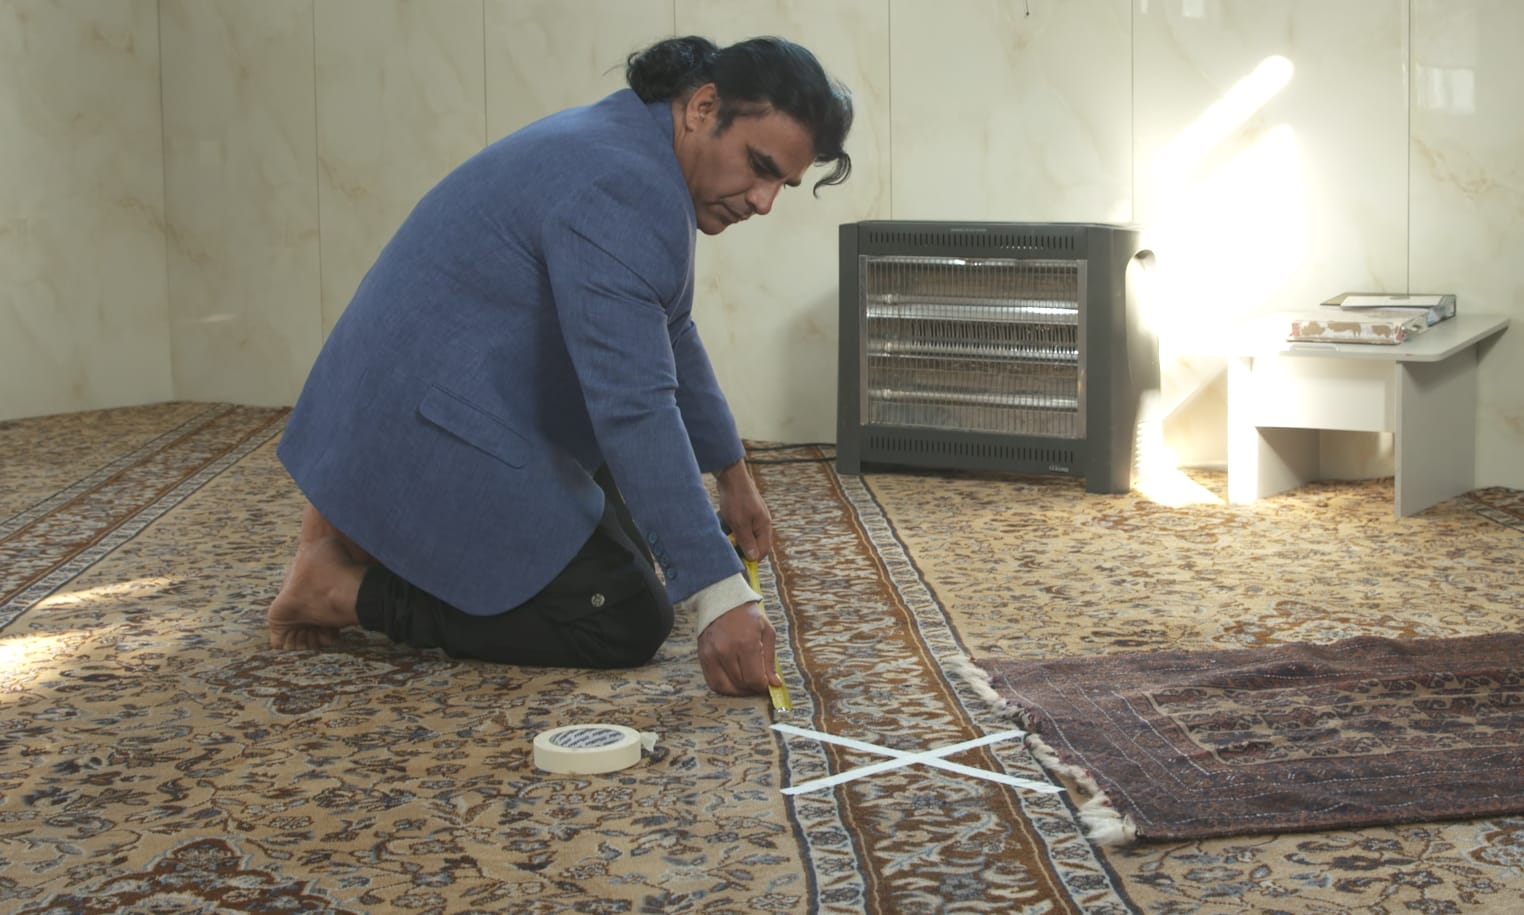 Abdul Aziz places markers designed to maintain distance between worshippers at Linwood mosque.